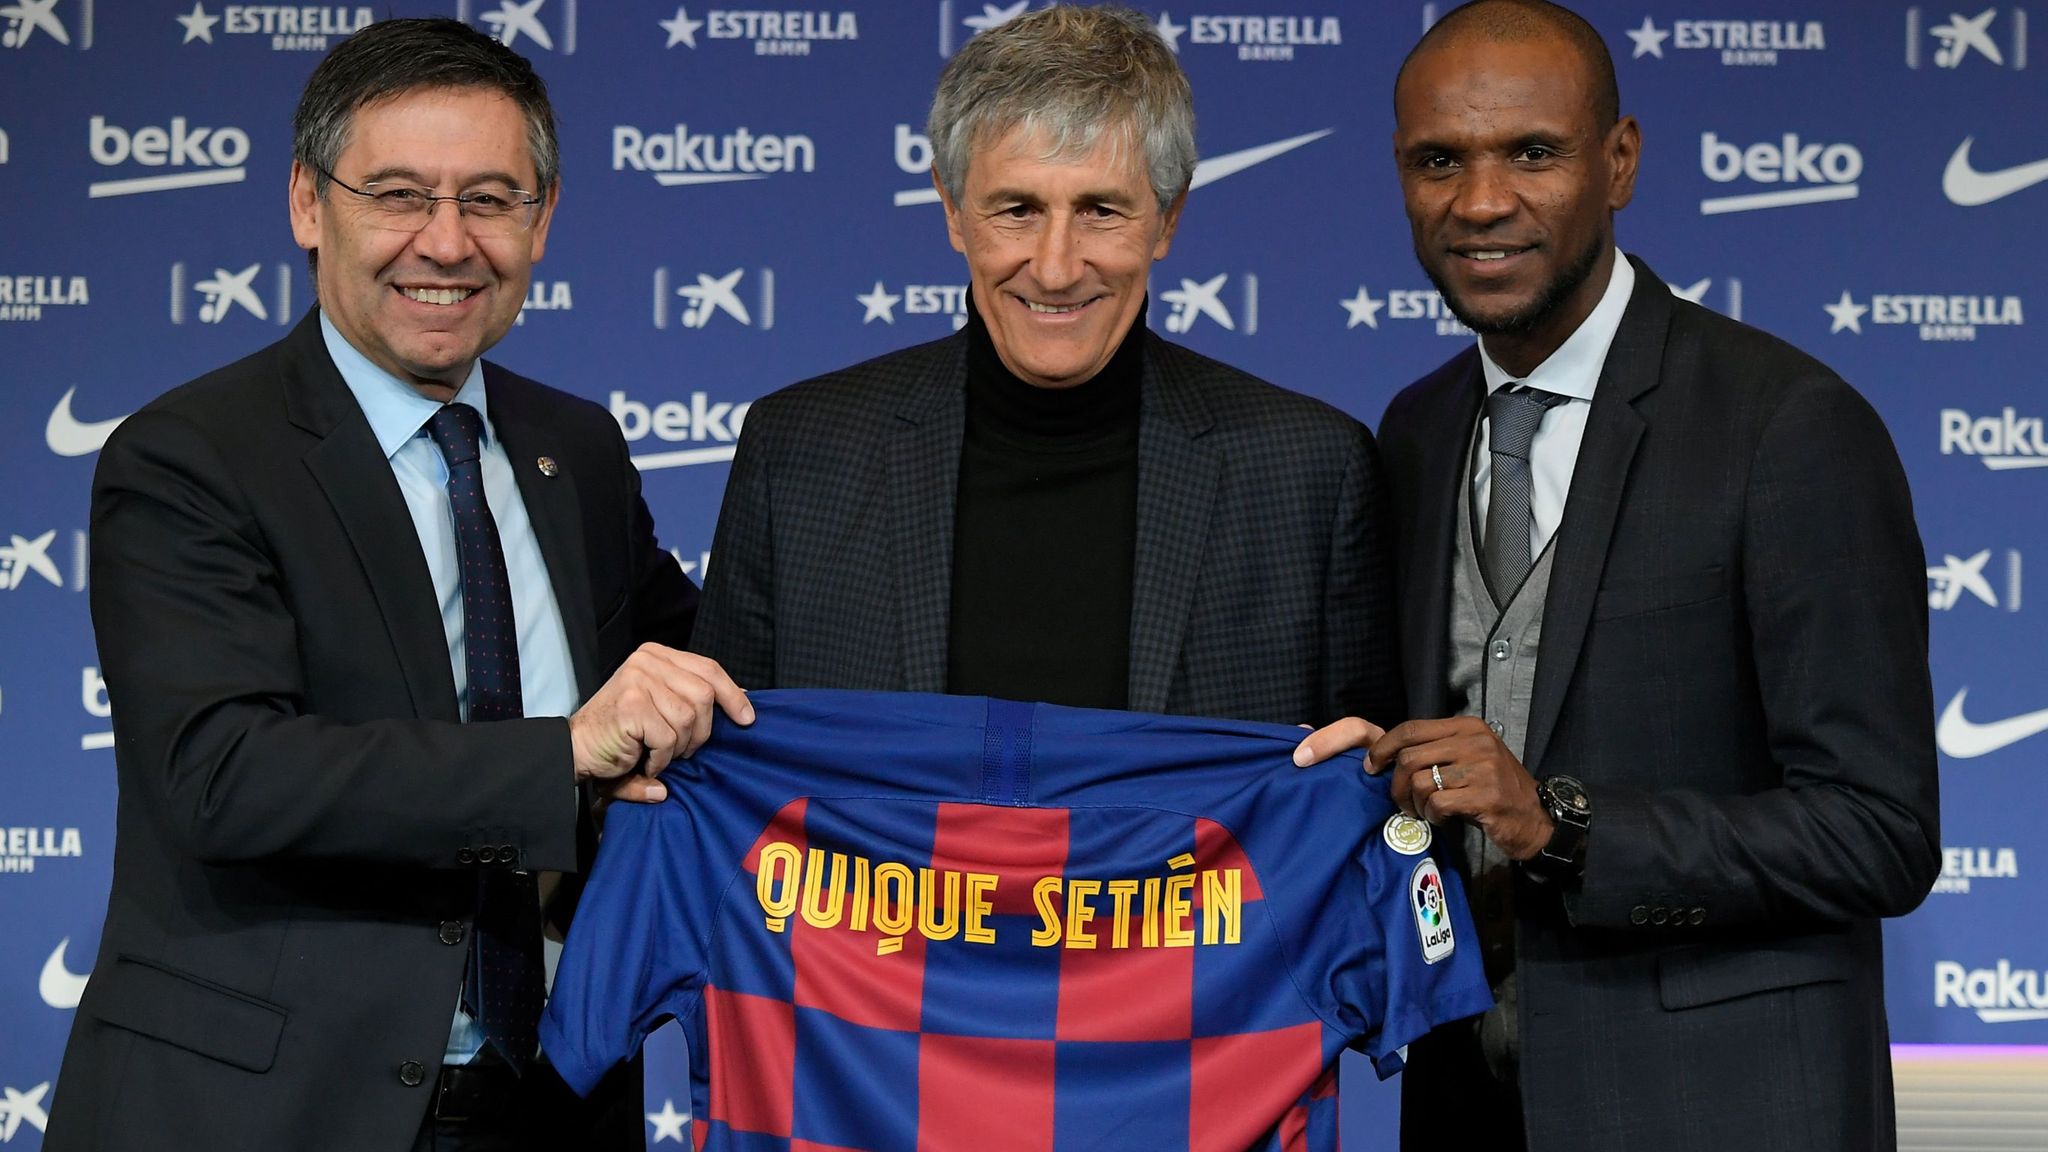 Quique Setien: Barcelona head coach says appointment beyond 'wildest  dreams' | Football News | Sky Sports